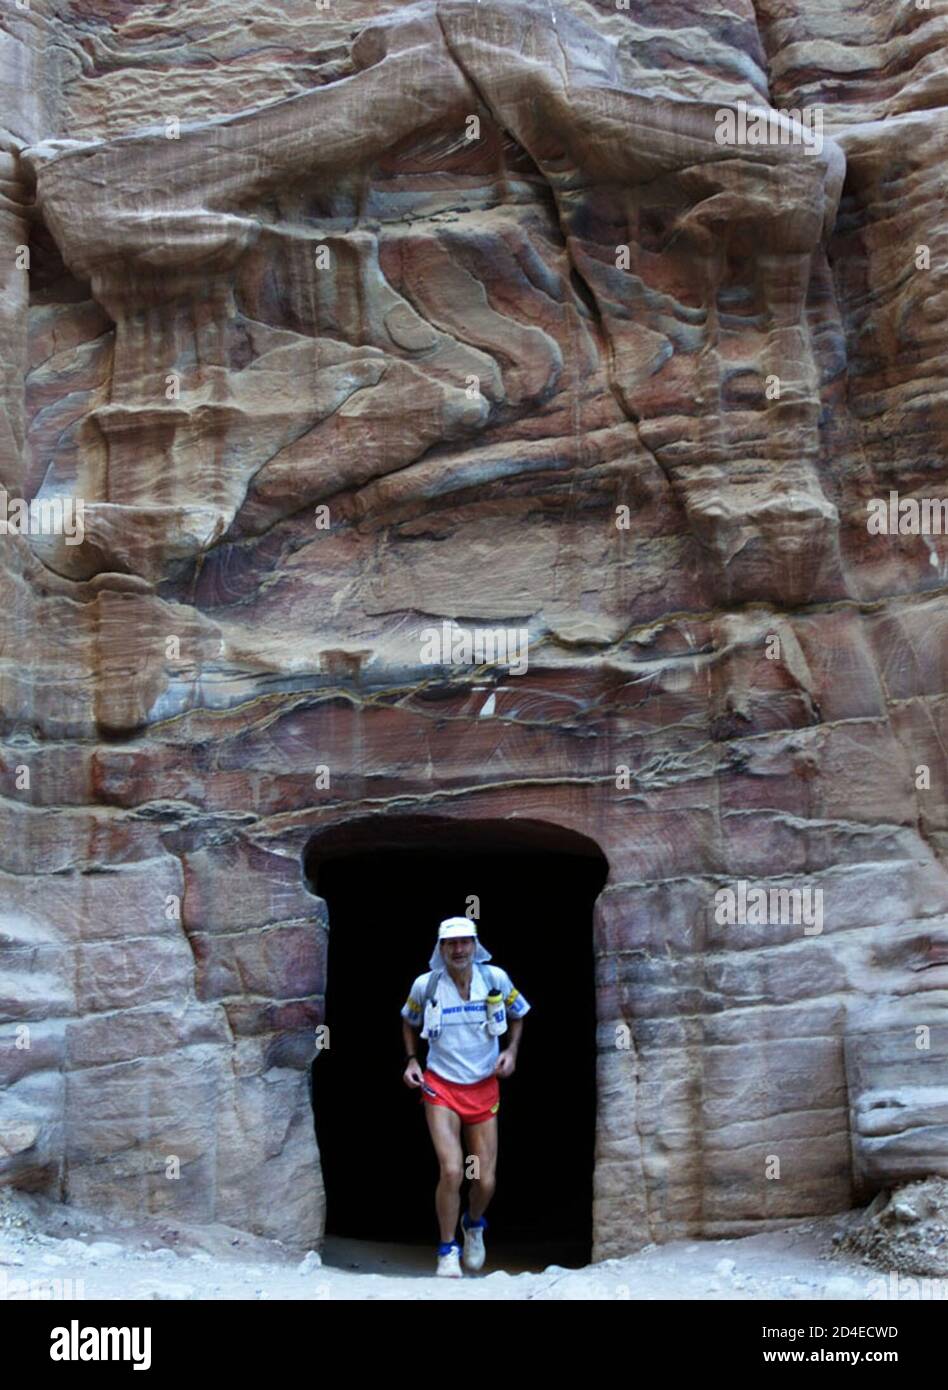 Marco Olmo, a 53-year-old from Italy, arrives through a rock face opening,  at the rose city of Petra November 9, 2001. Olmo won the 2001 Desert Cup on  Friday, 20 hours ahead